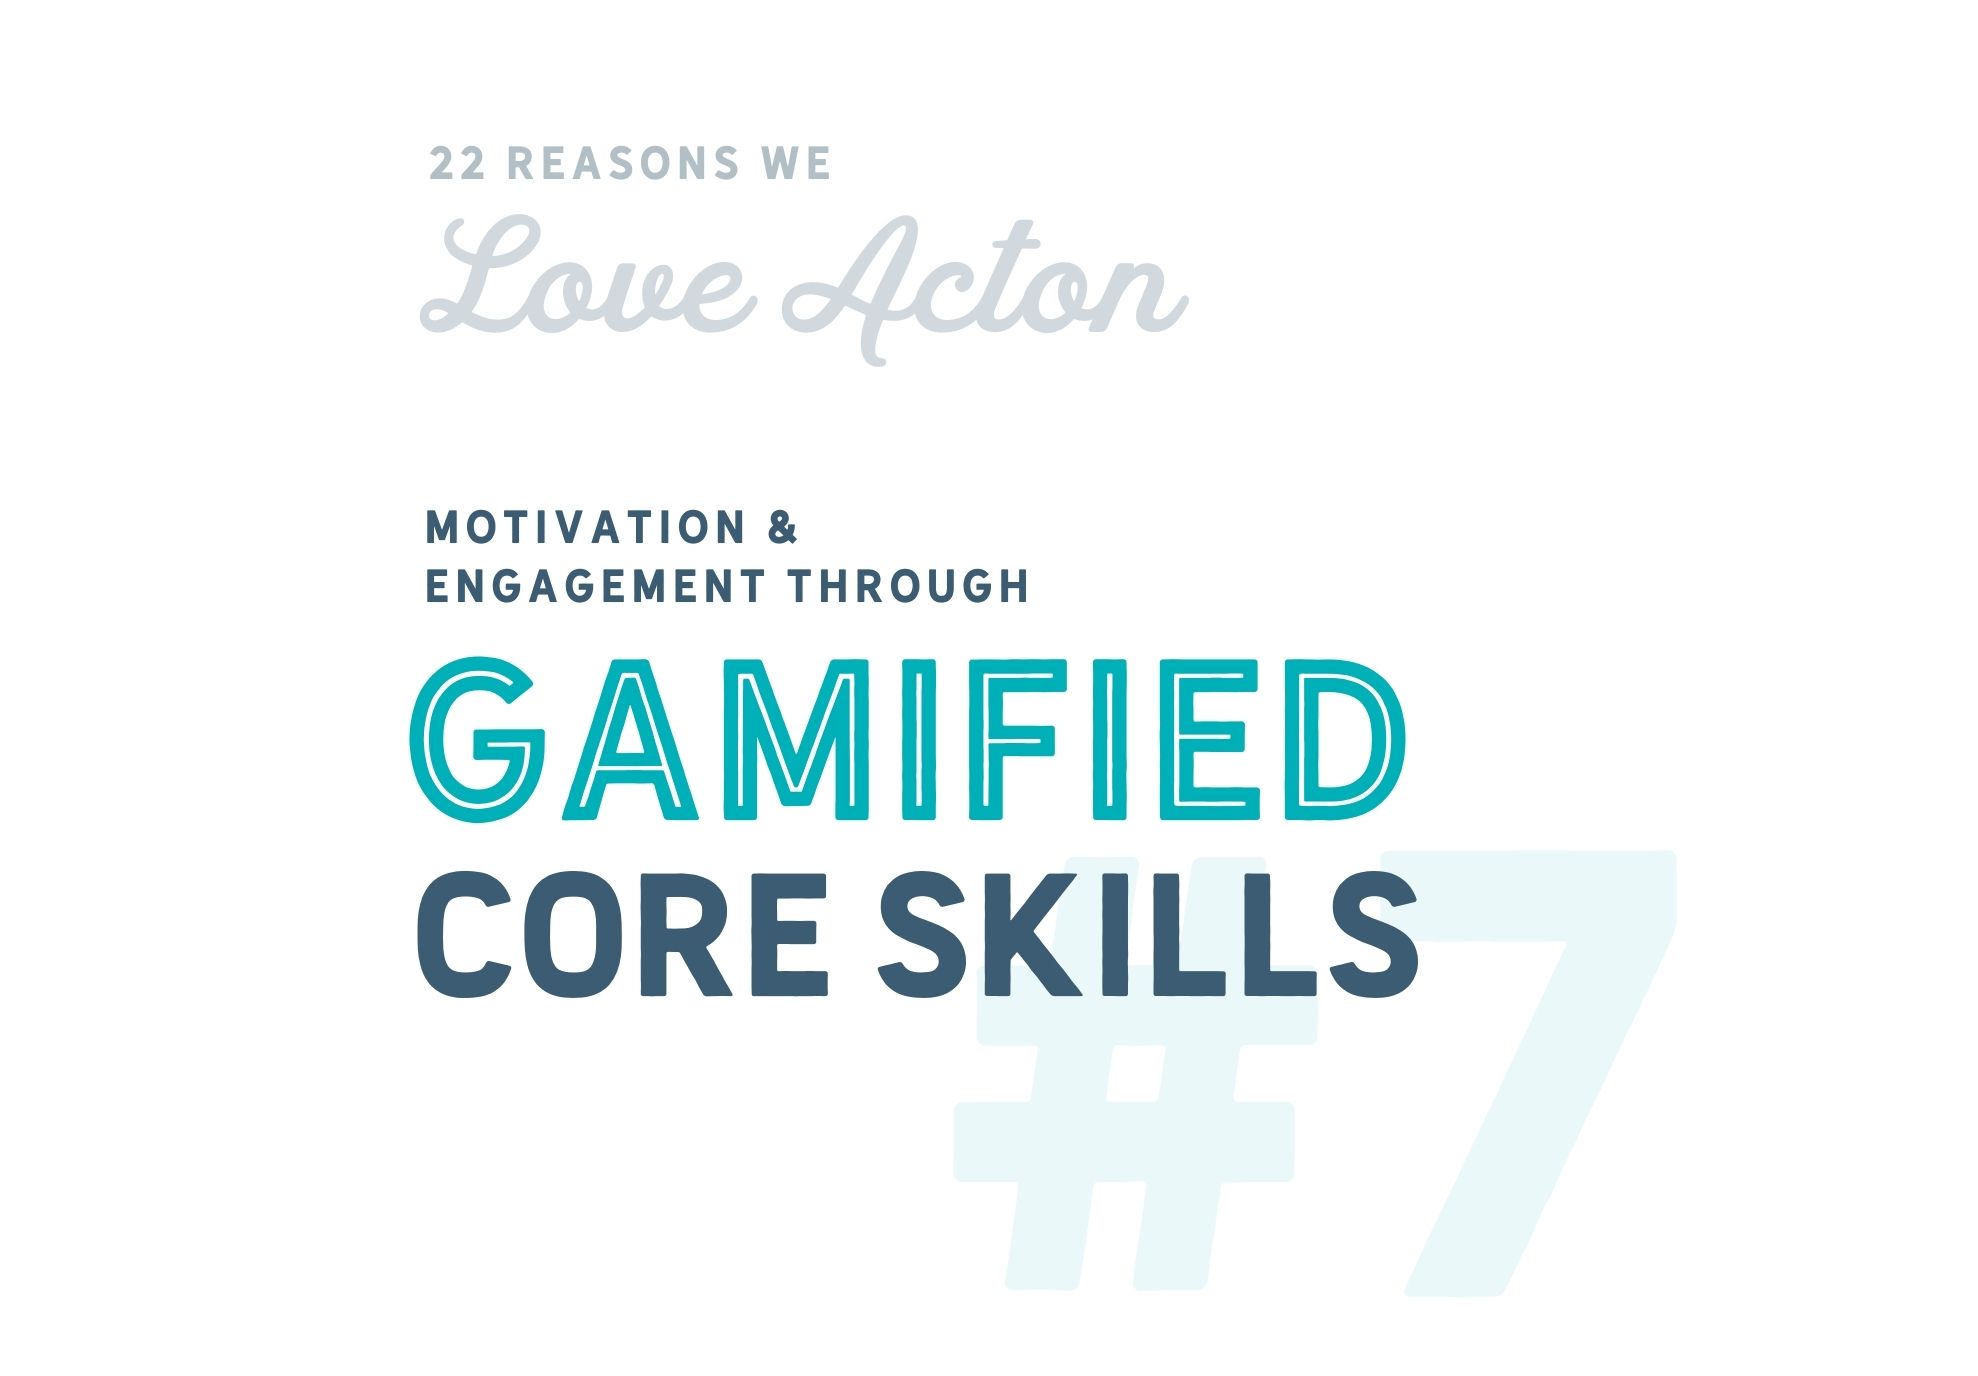 #7 Motivation & Engagement Through Gamified Core Skills